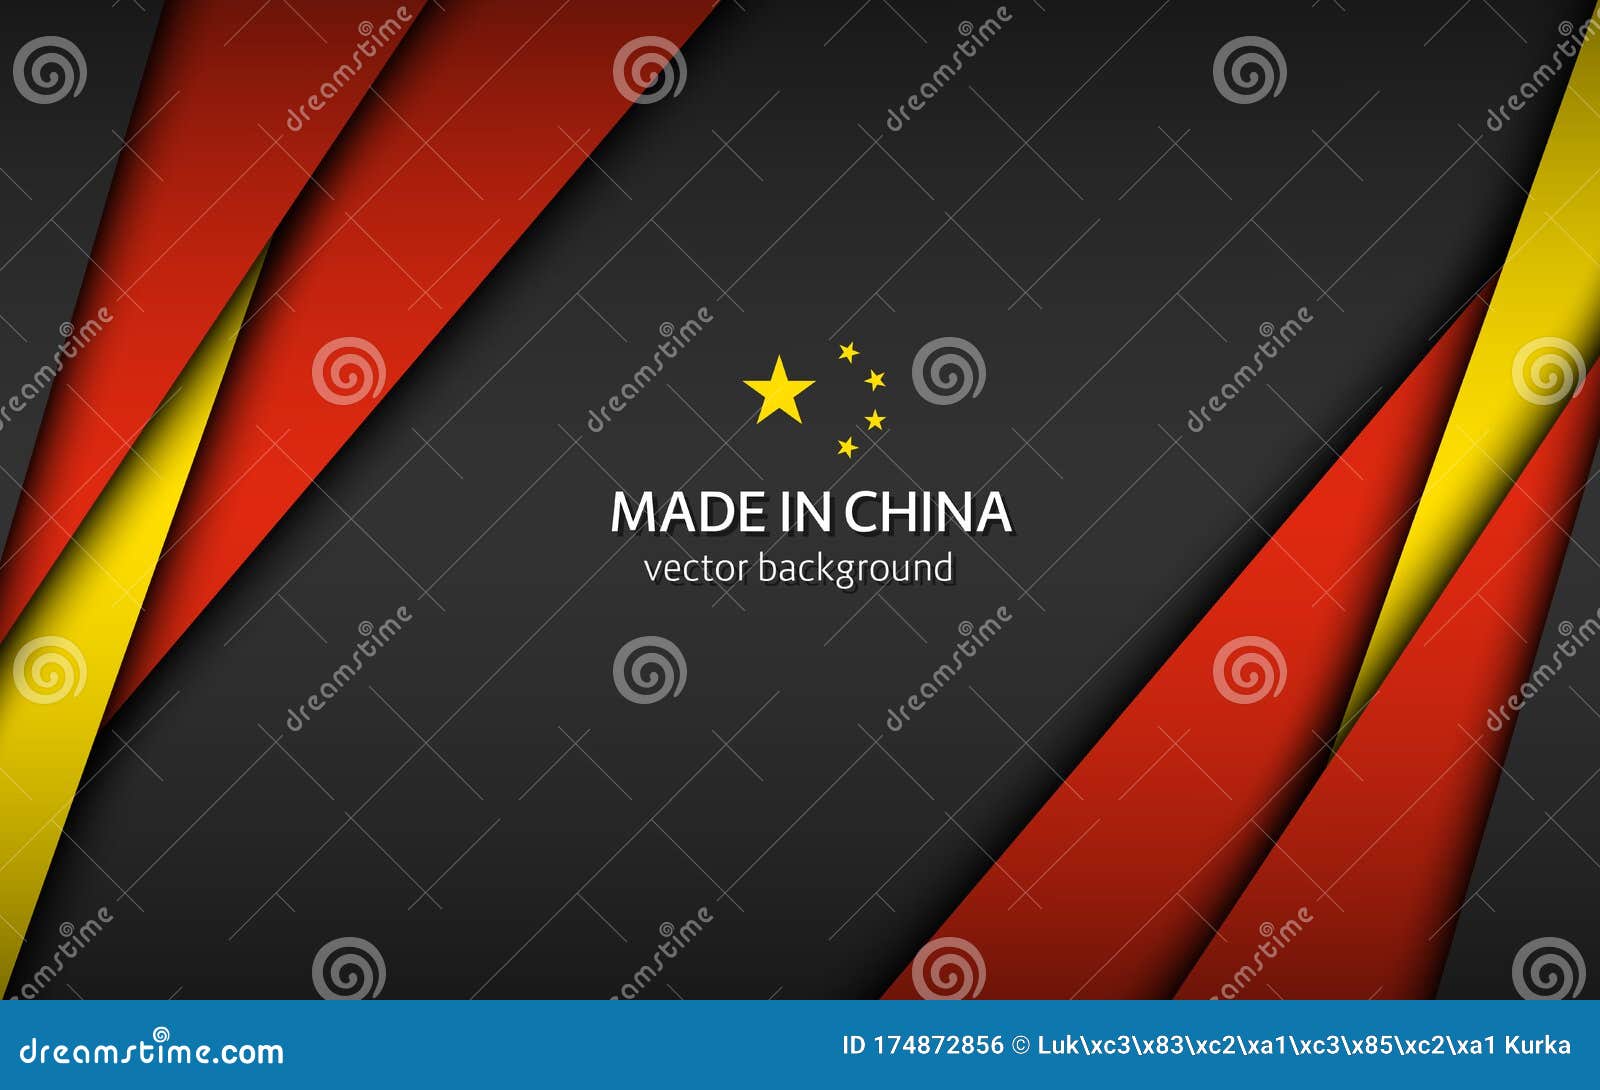 Made in China, Modern Vector Background with Chinese Colors, Overlayed